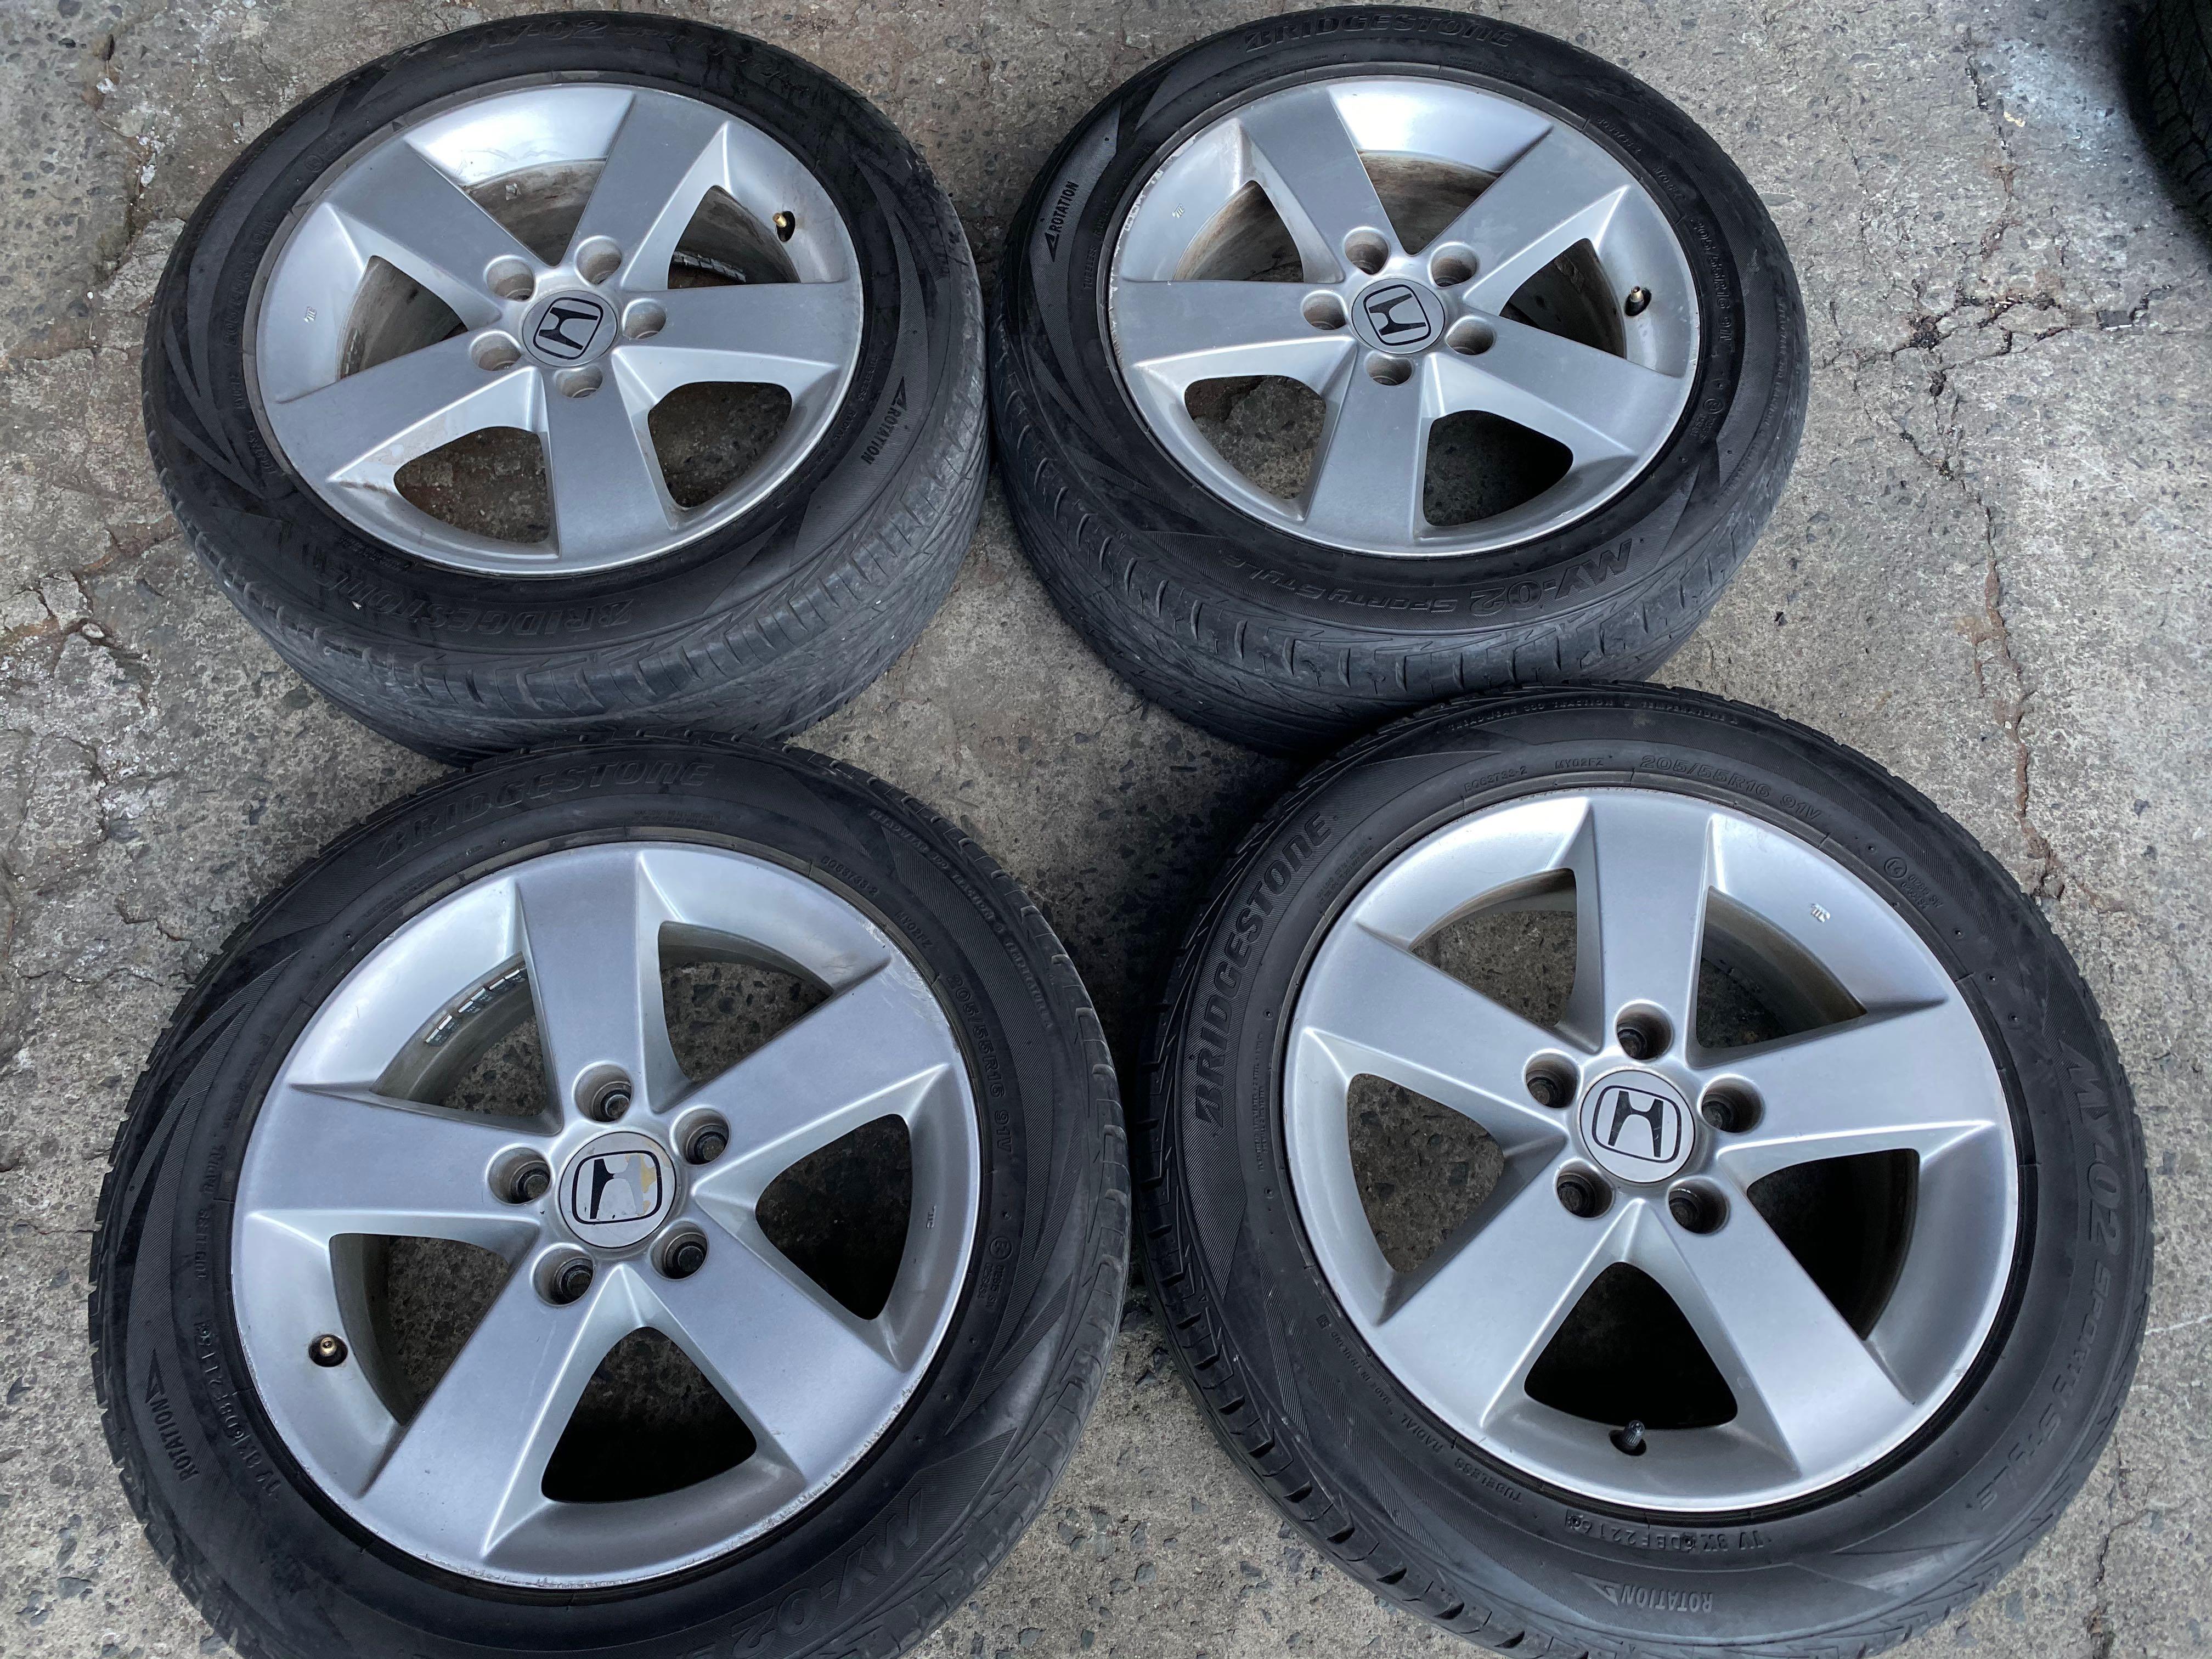 16 Honda Civic Stock Mags Used 5holes Pcd 114 With 5 55 R16 Bridgestone Tire Used Car Parts Accessories Mags And Tires On Carousell